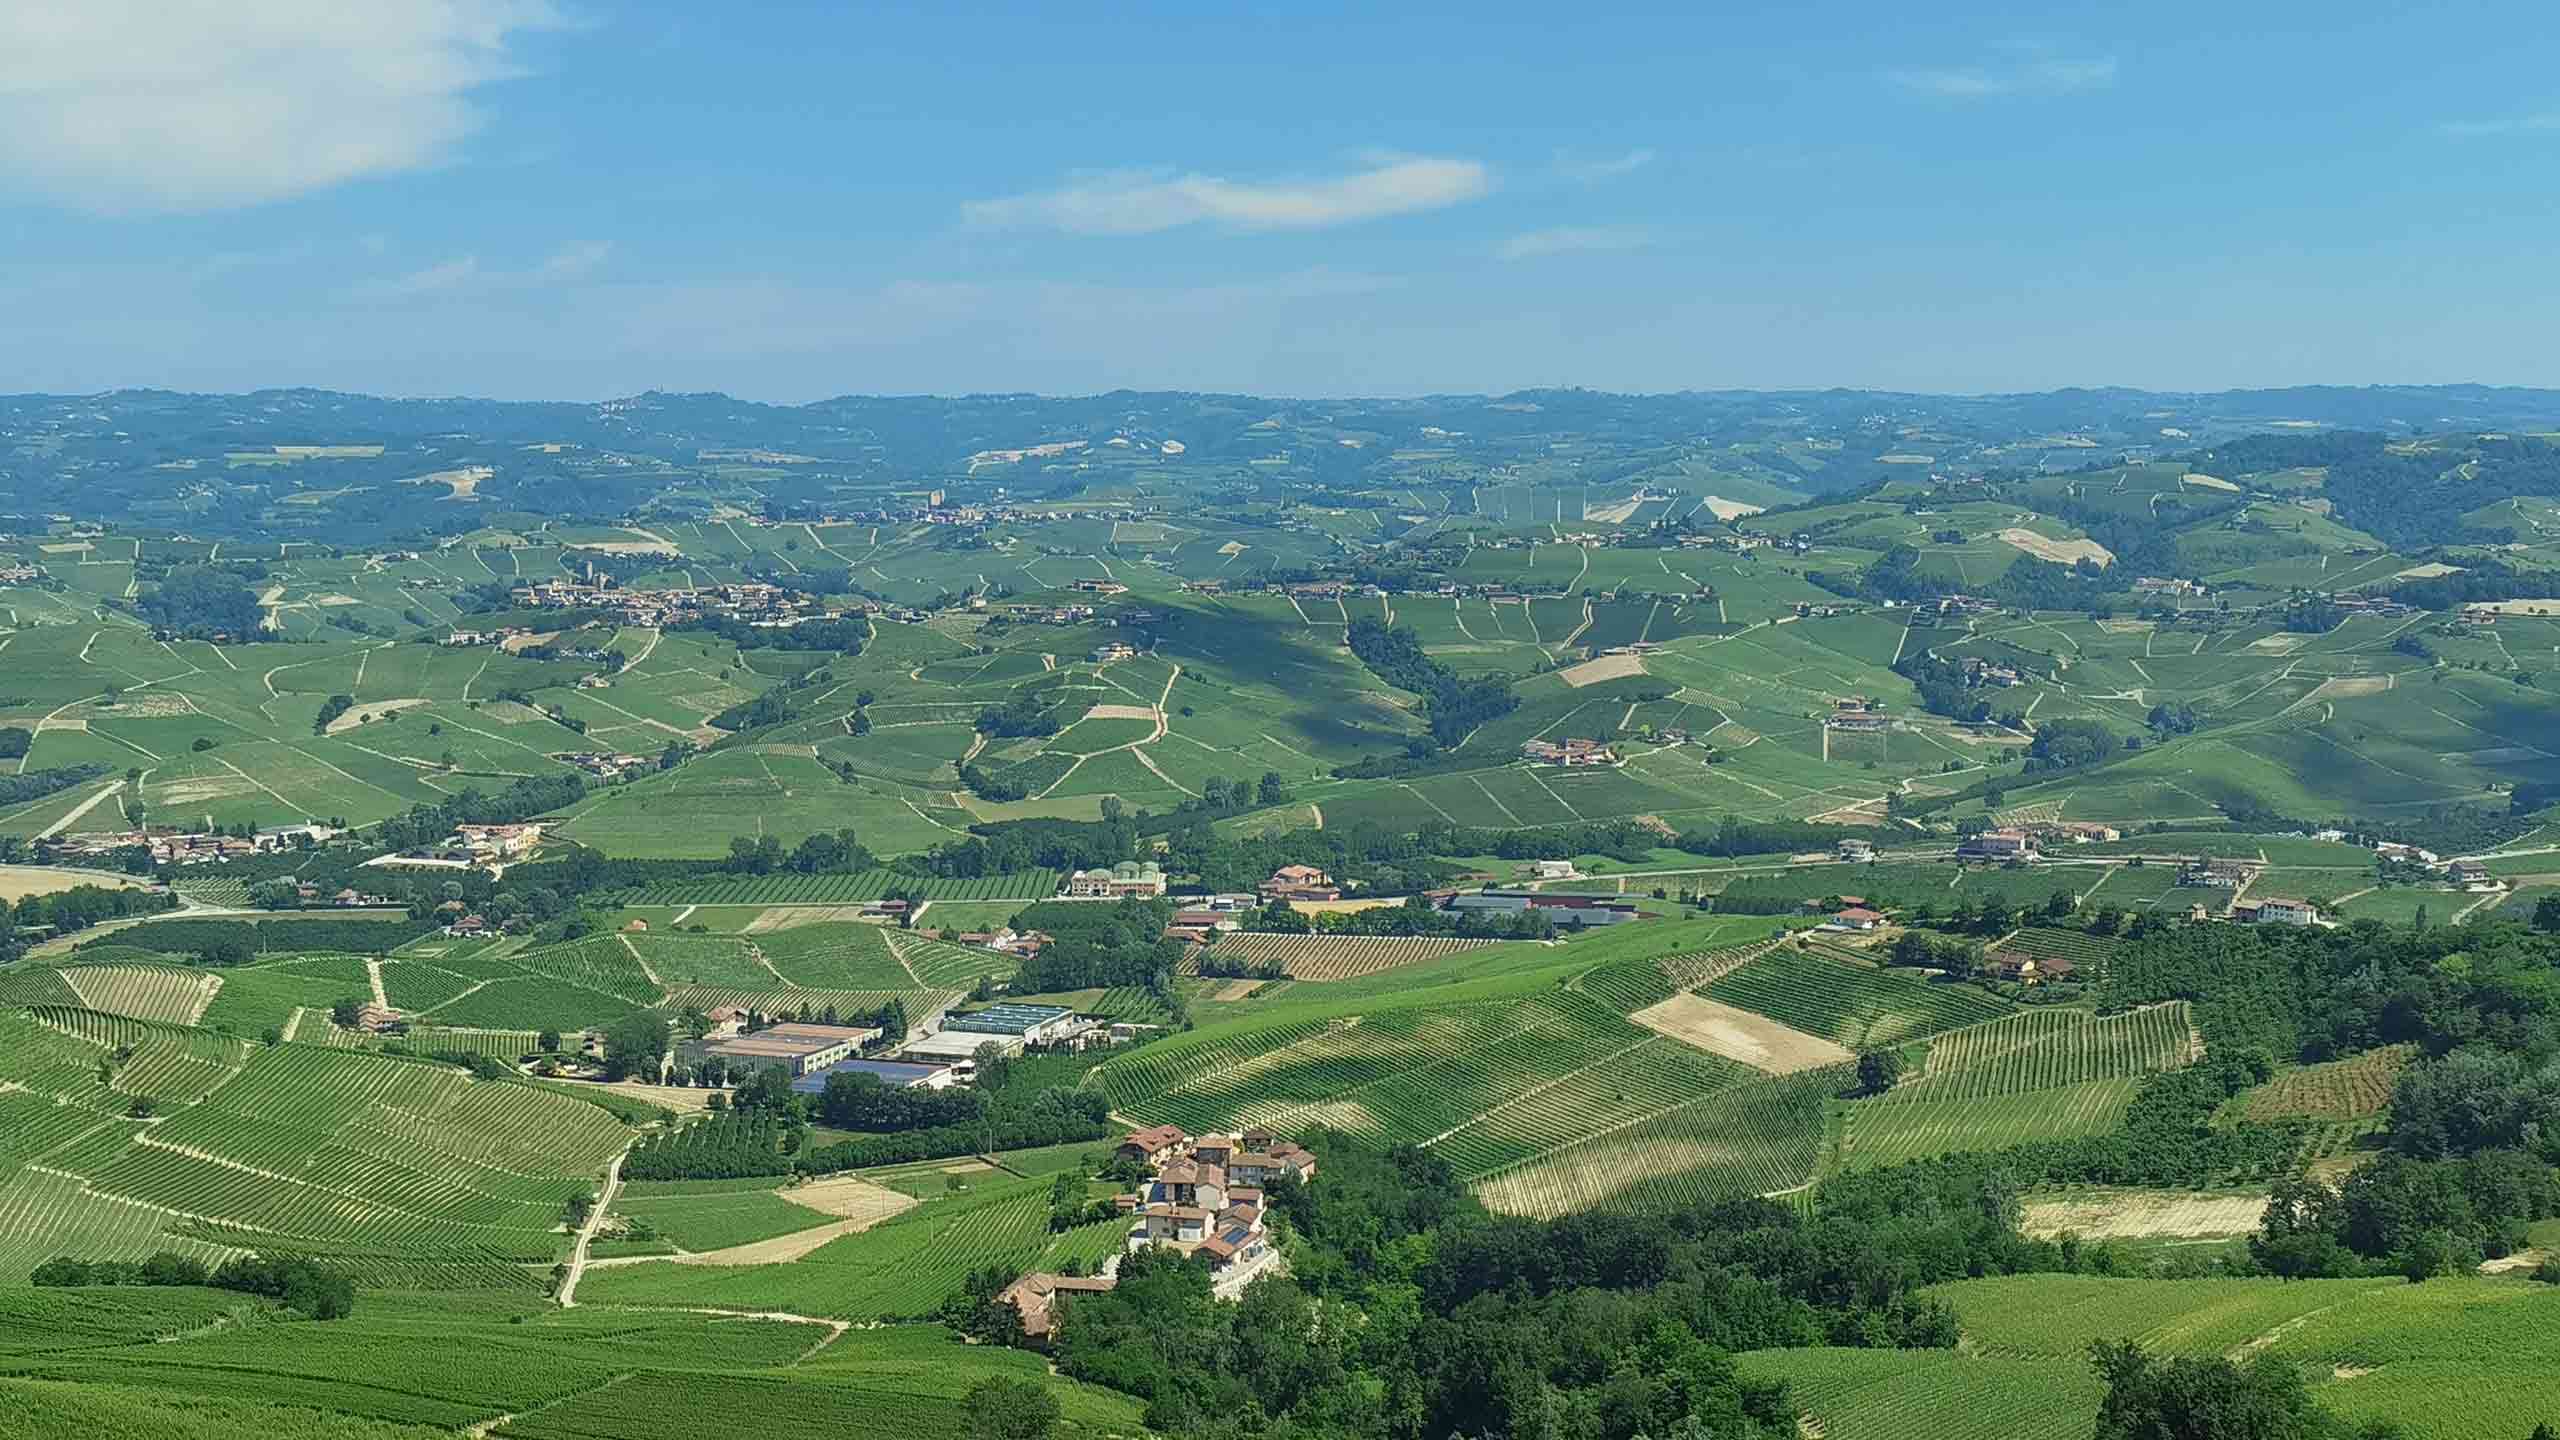 Northern Italy Gastronomic Piedmont Walk (Villages, Castles & Vineyards) 9D8N, Self-Guided